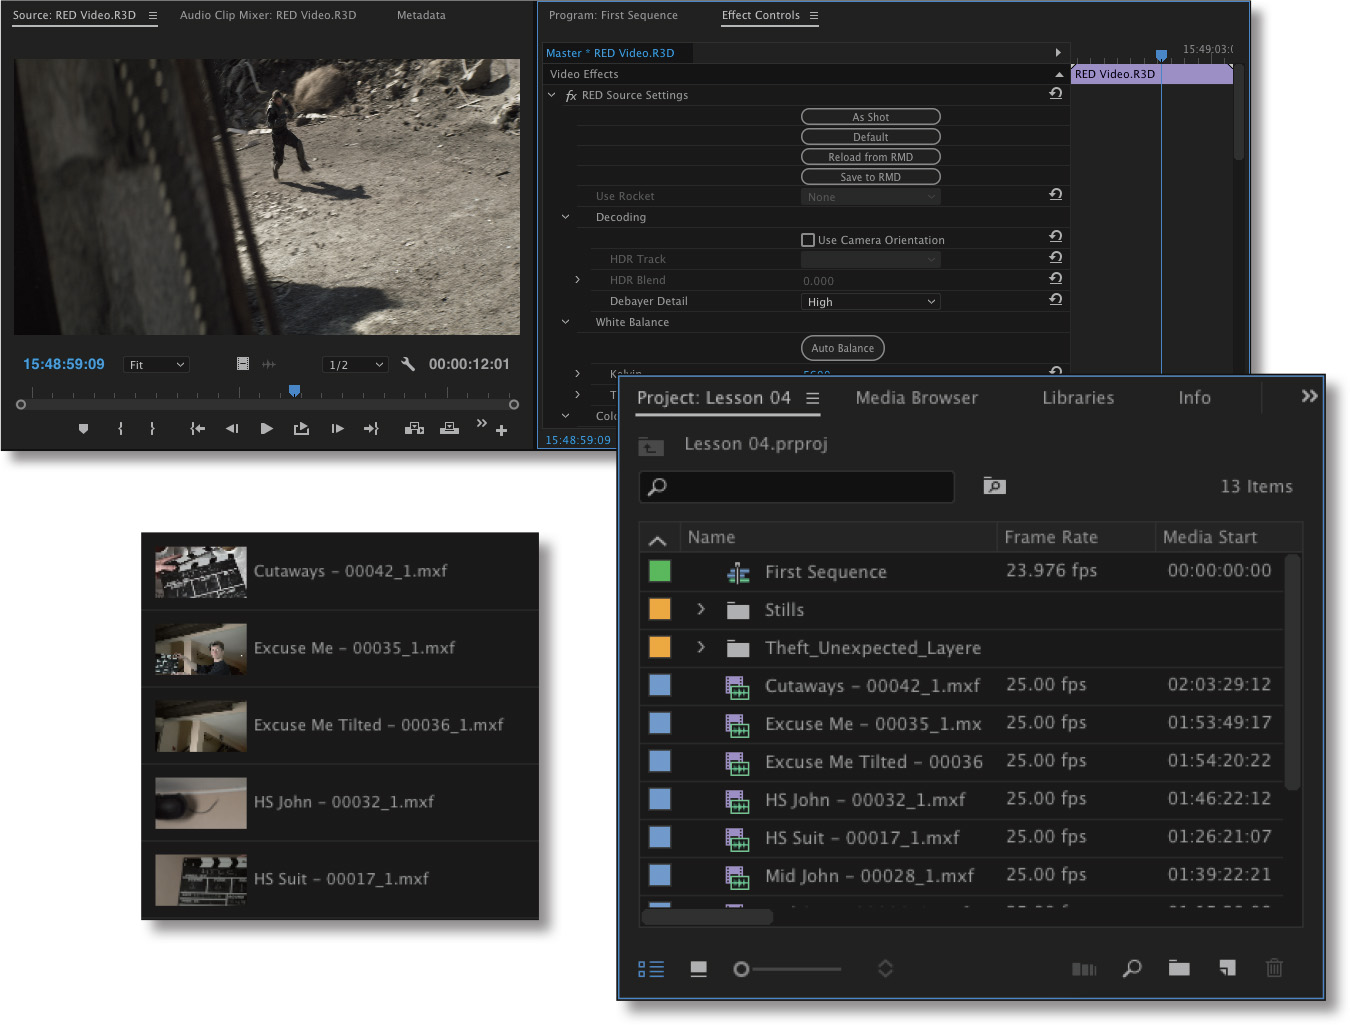 Four cascading panels of the workspace on Adobe premiere Pro: Source Monitor, Effect Controls, Media Browser, and a Cropped panel displaying thumbnails and names of video clips.